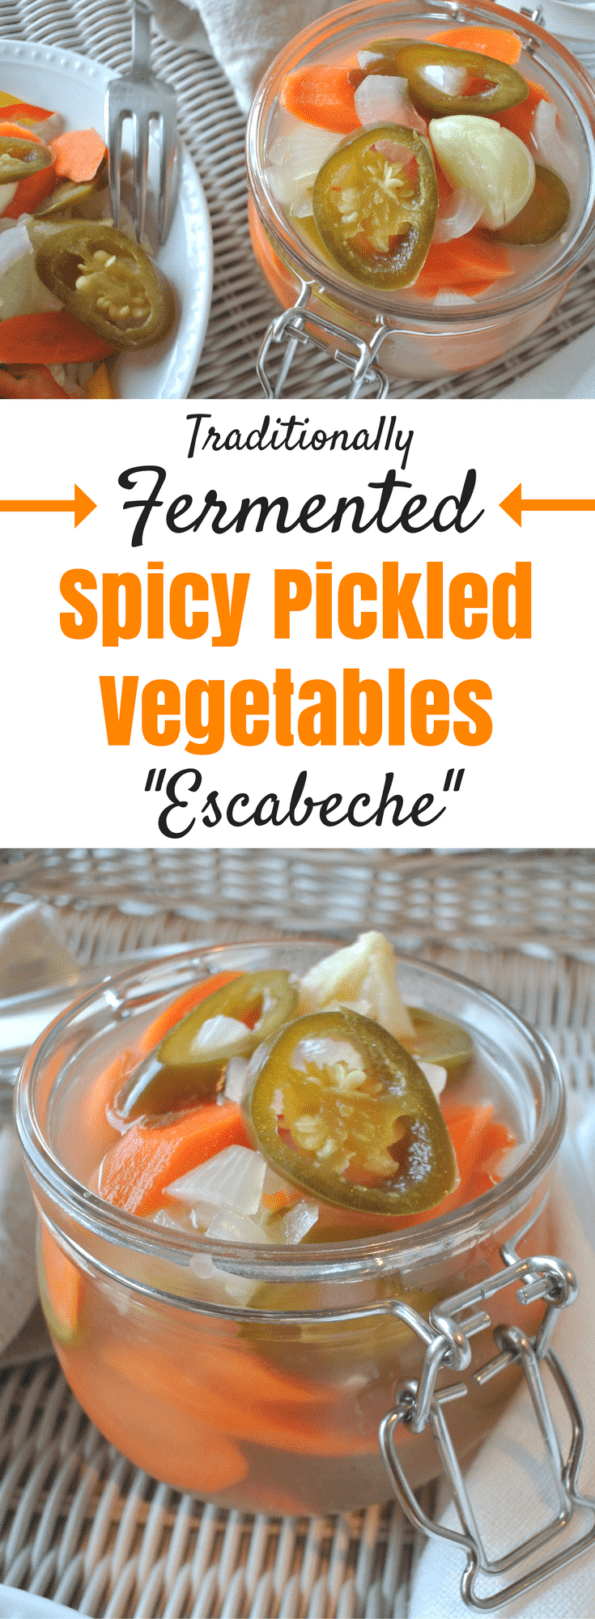 A collage of jars of escabeche with text overlay.